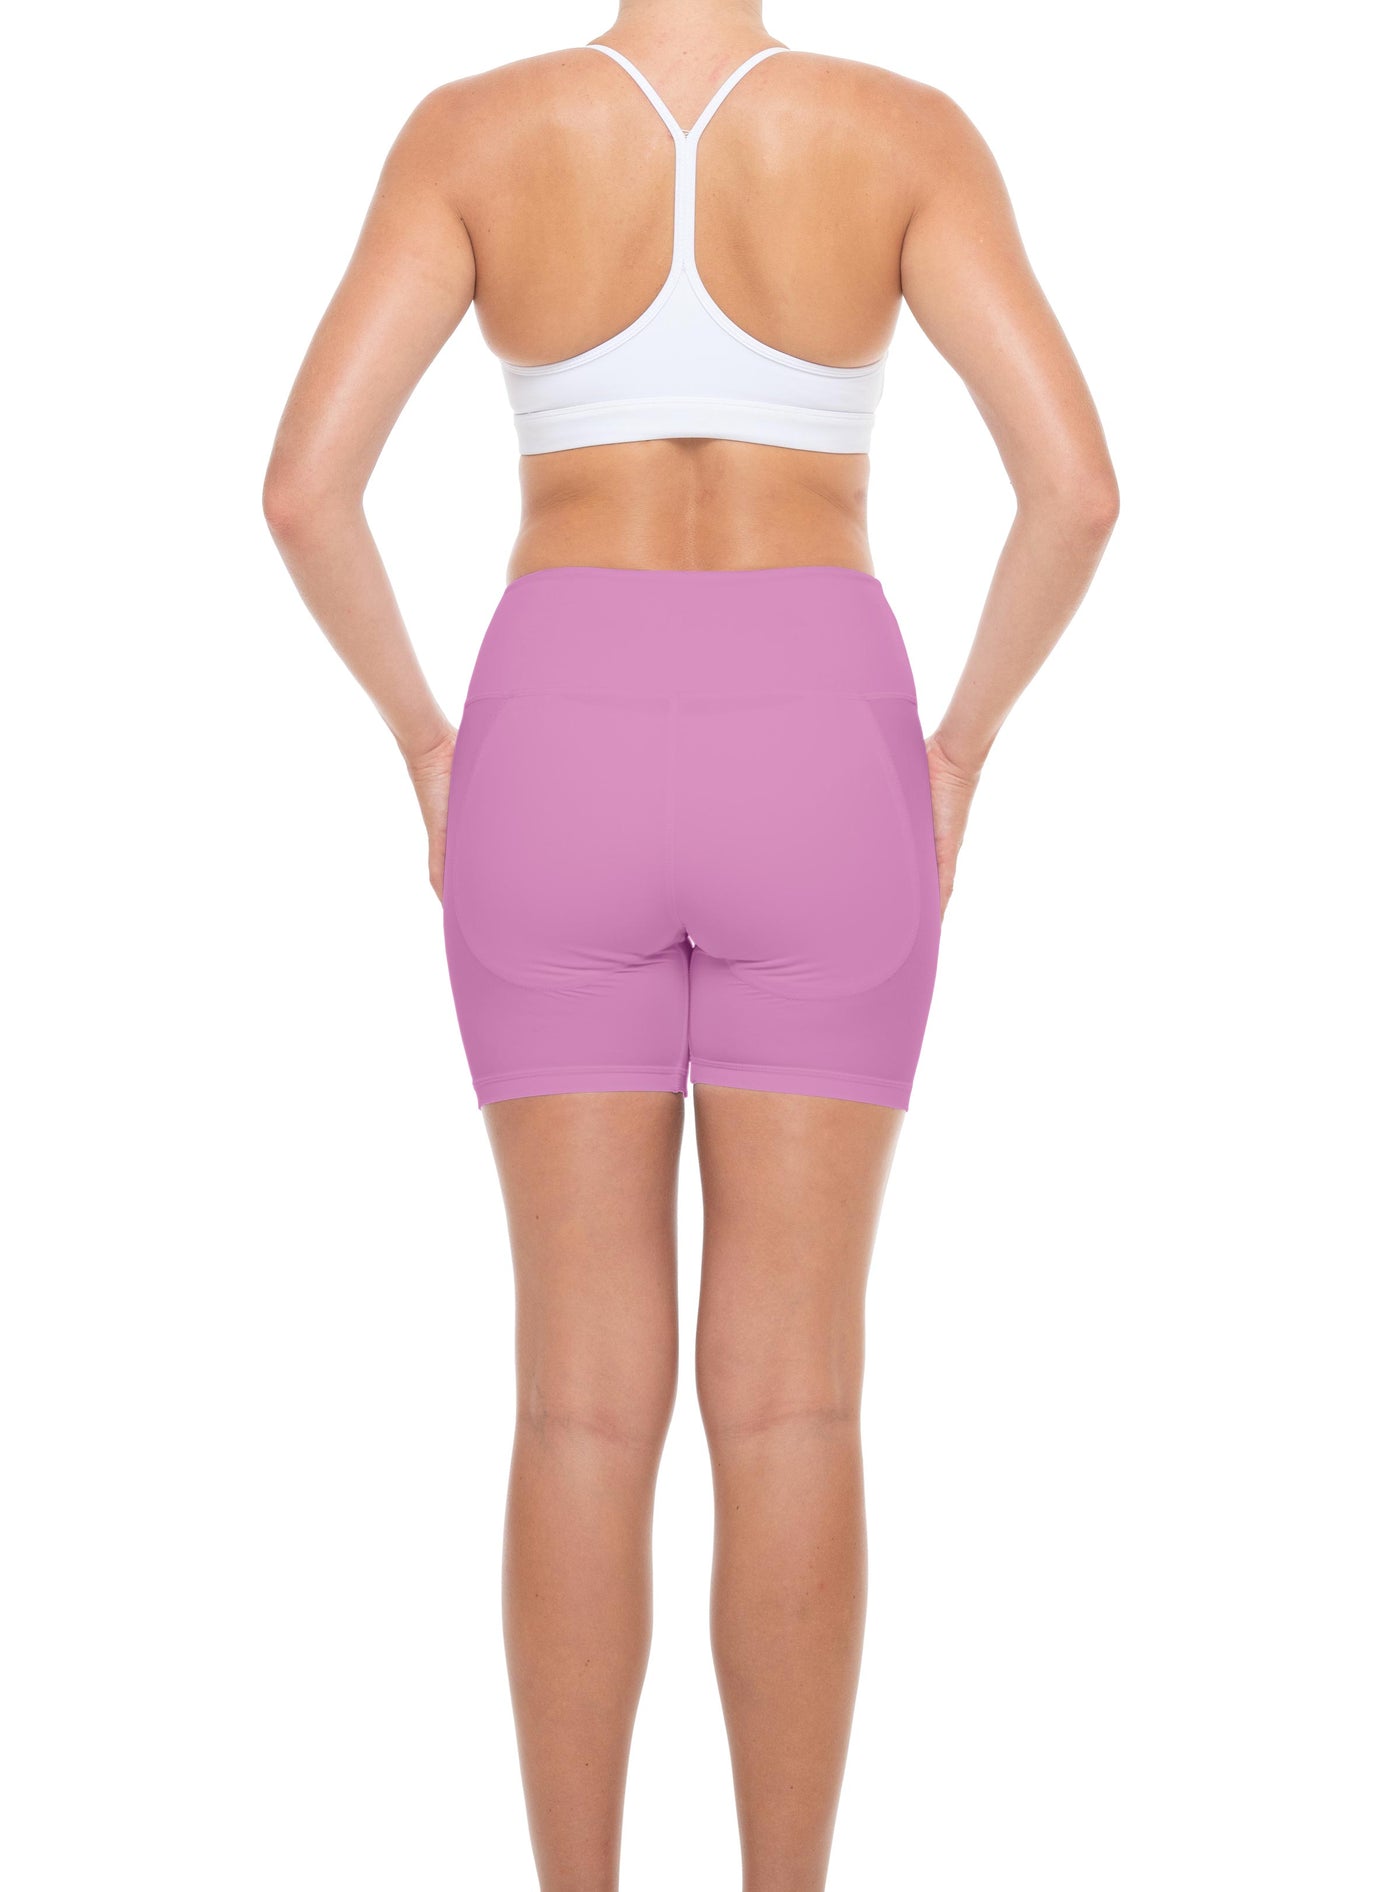 Women's Candyfloss Pink Paddle Shorts (Incl. Seat Pad)